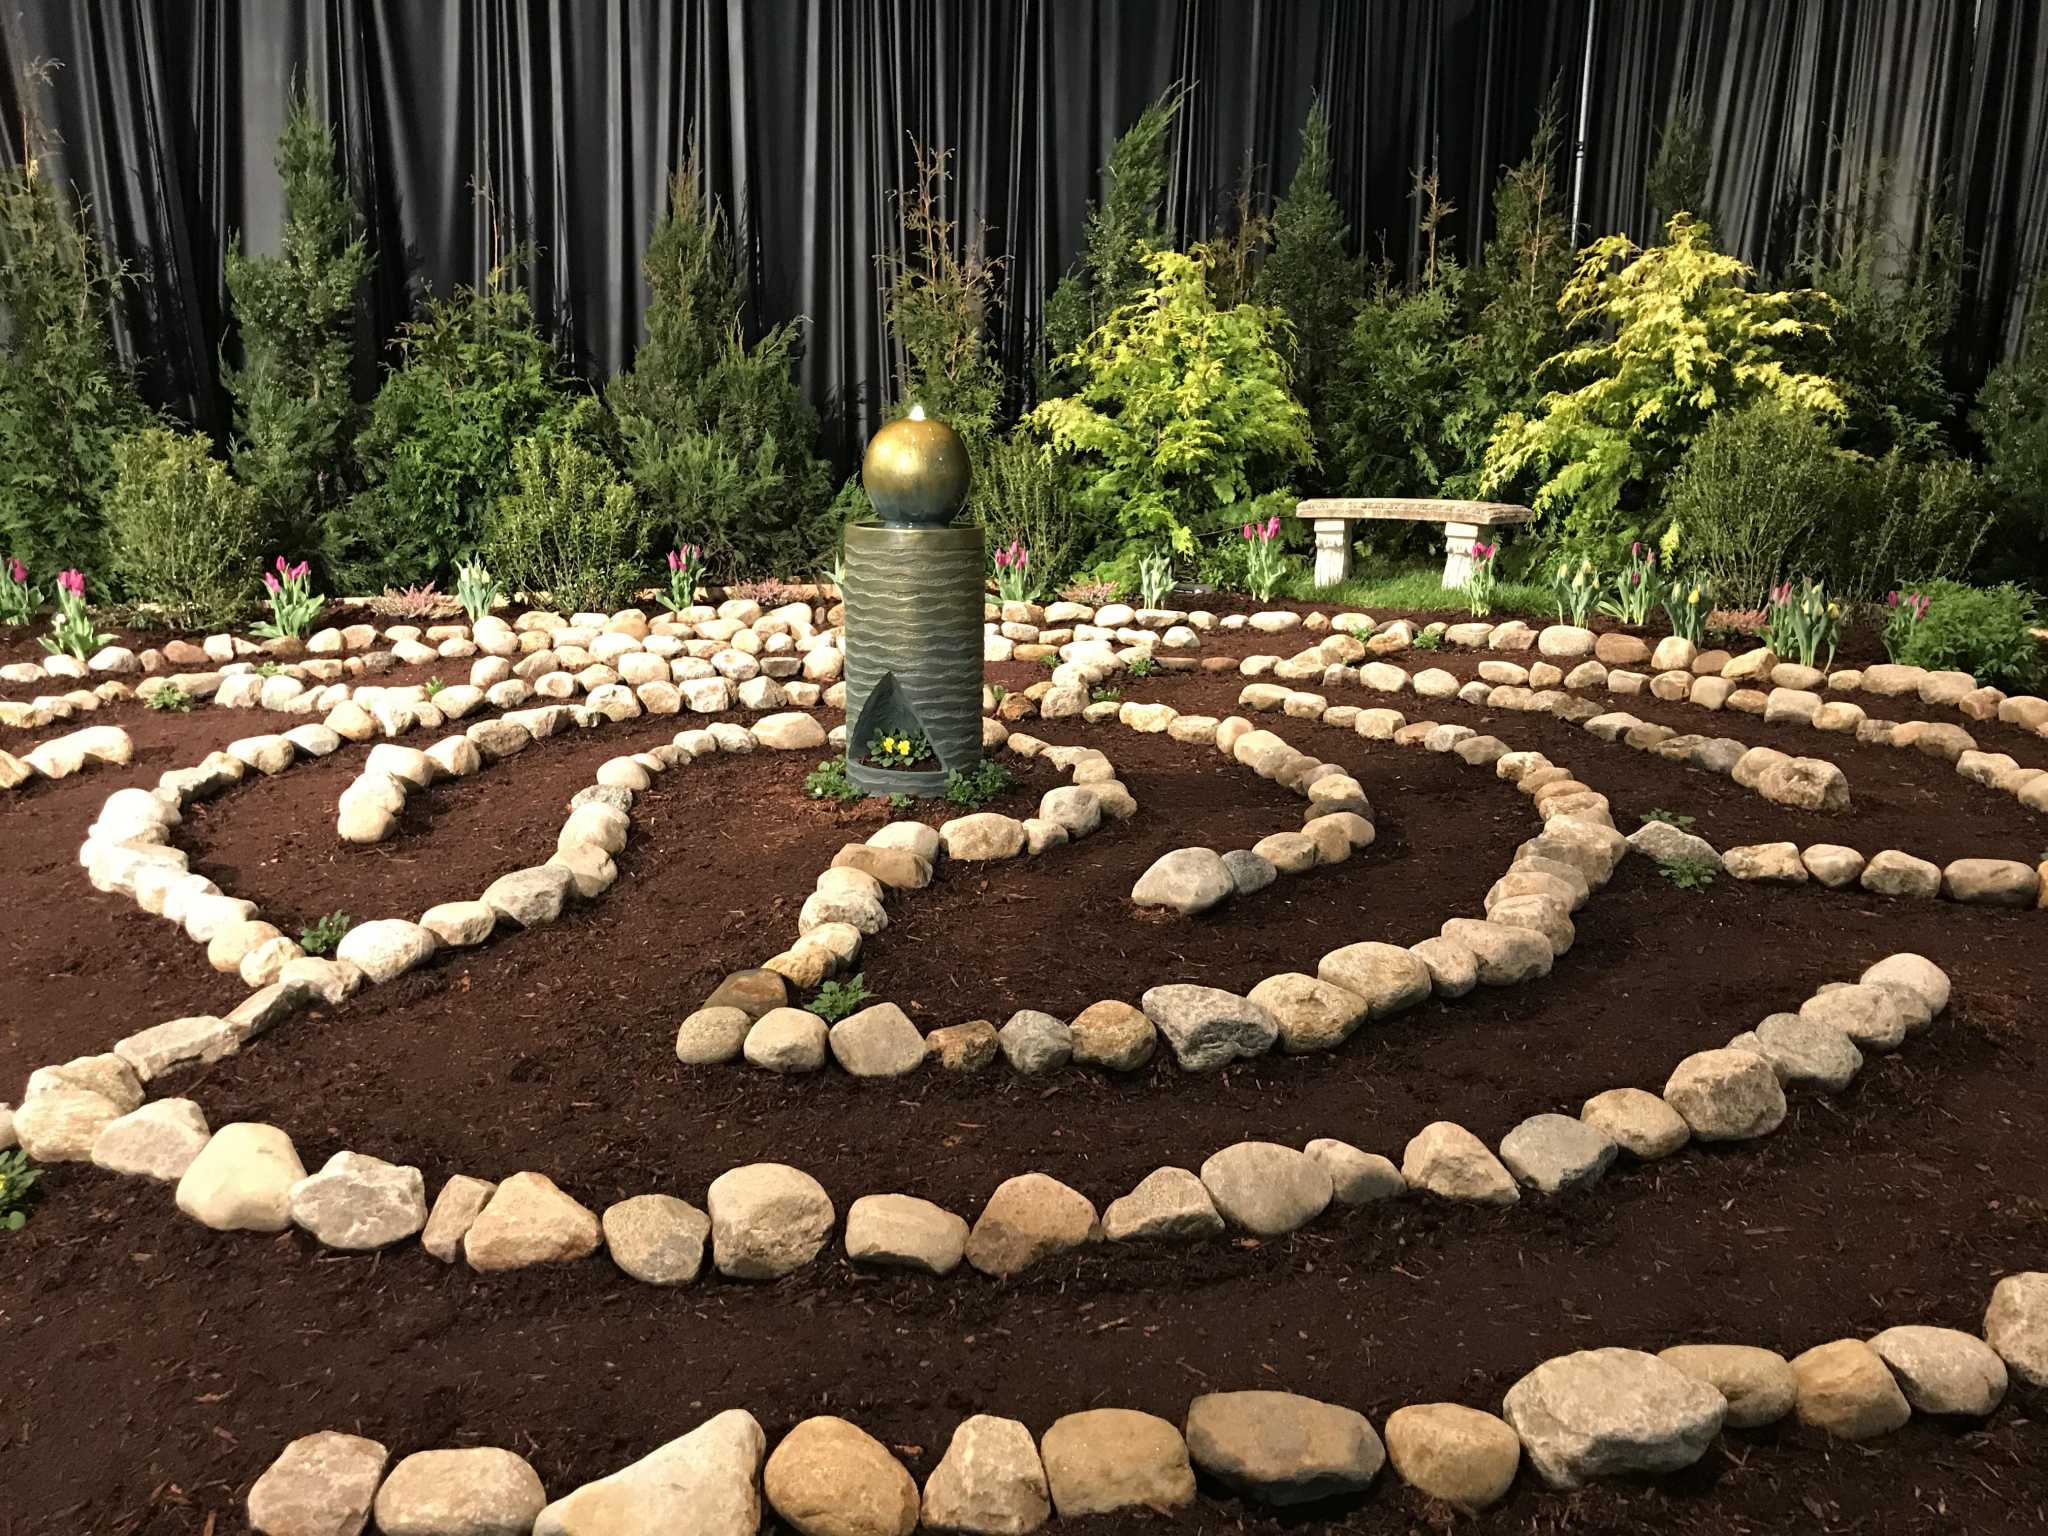 CT Flower and Garden Show set for Feb. 24-27